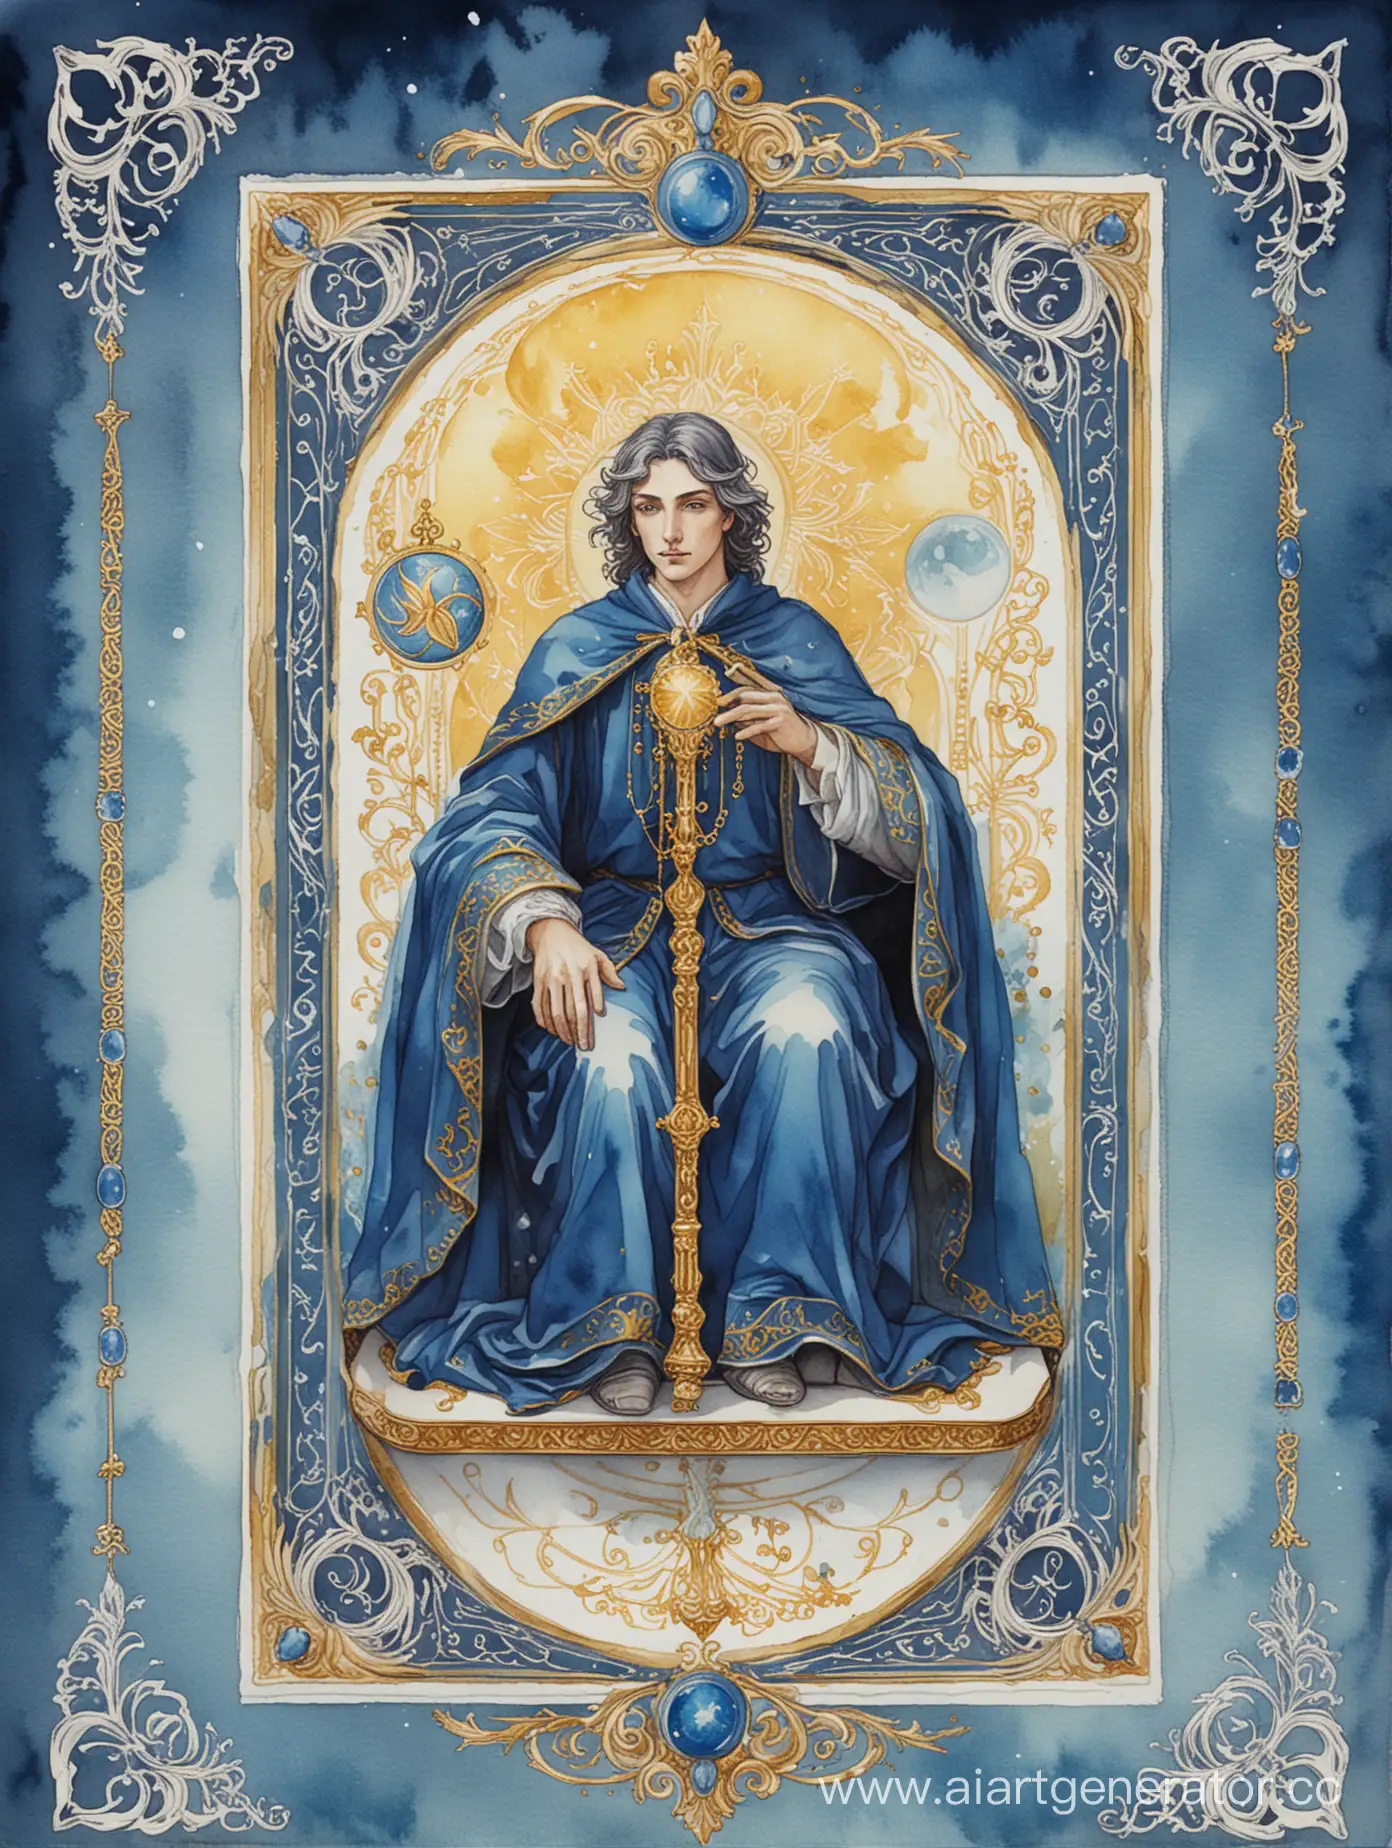 Blue-and-White-Watercolor-Tarot-Card-with-Gold-Filigree-Ornament-The-Magician-Sitting-on-Marble-Throne